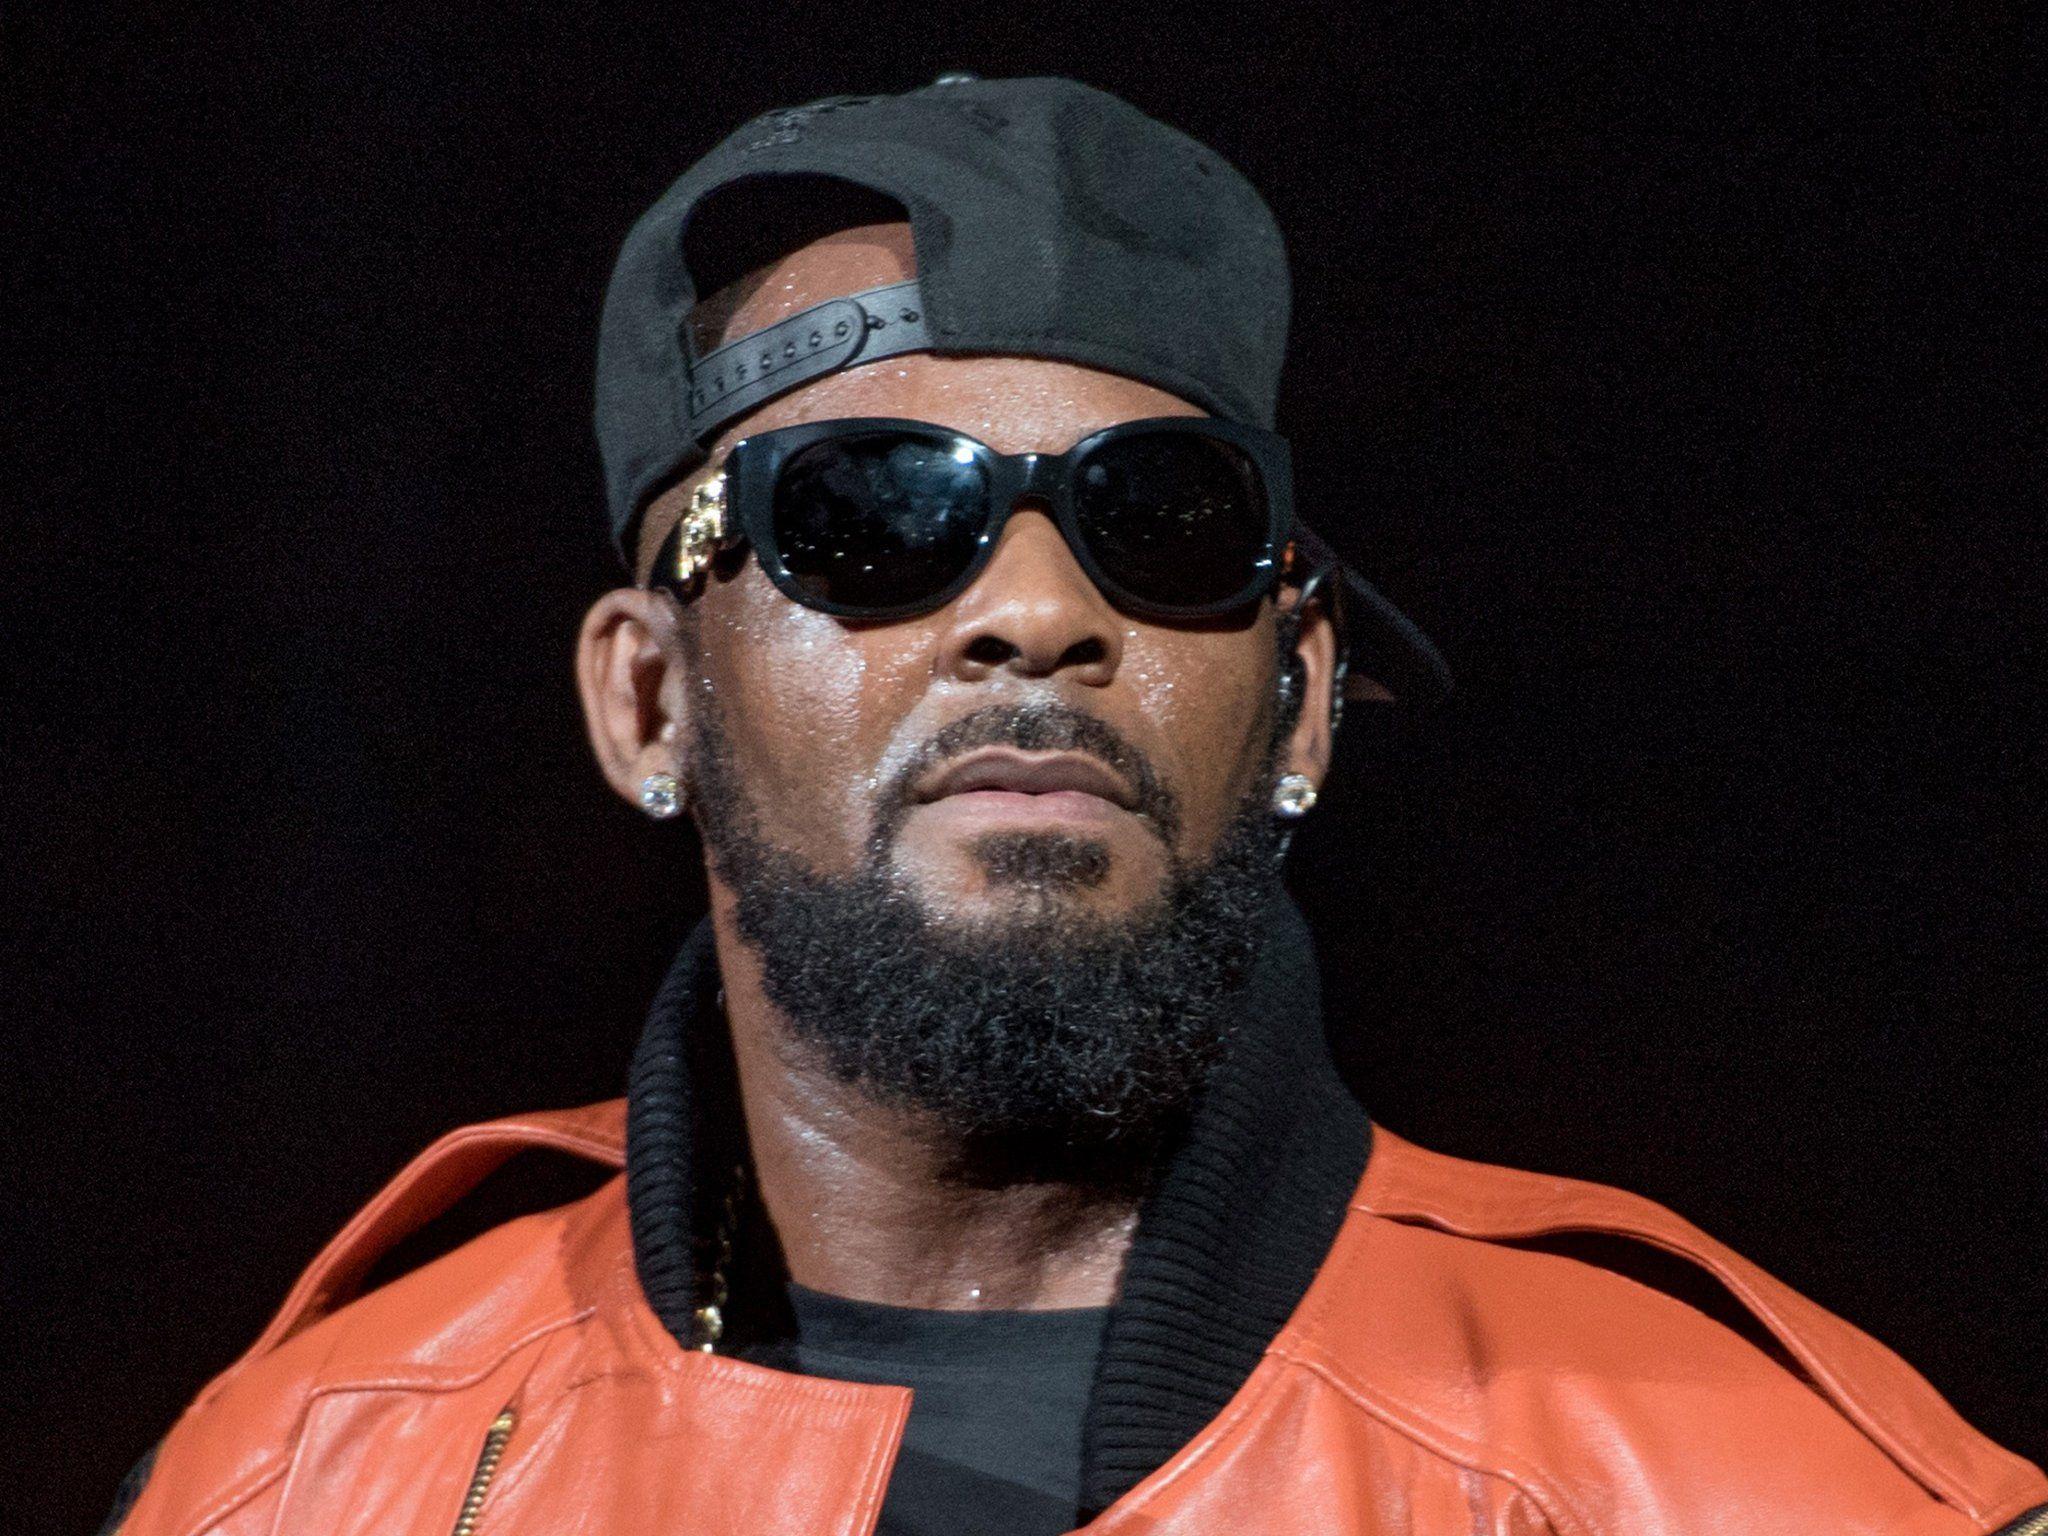 R Kelly team claims #MuteRKelly campaign is 'public lynching'